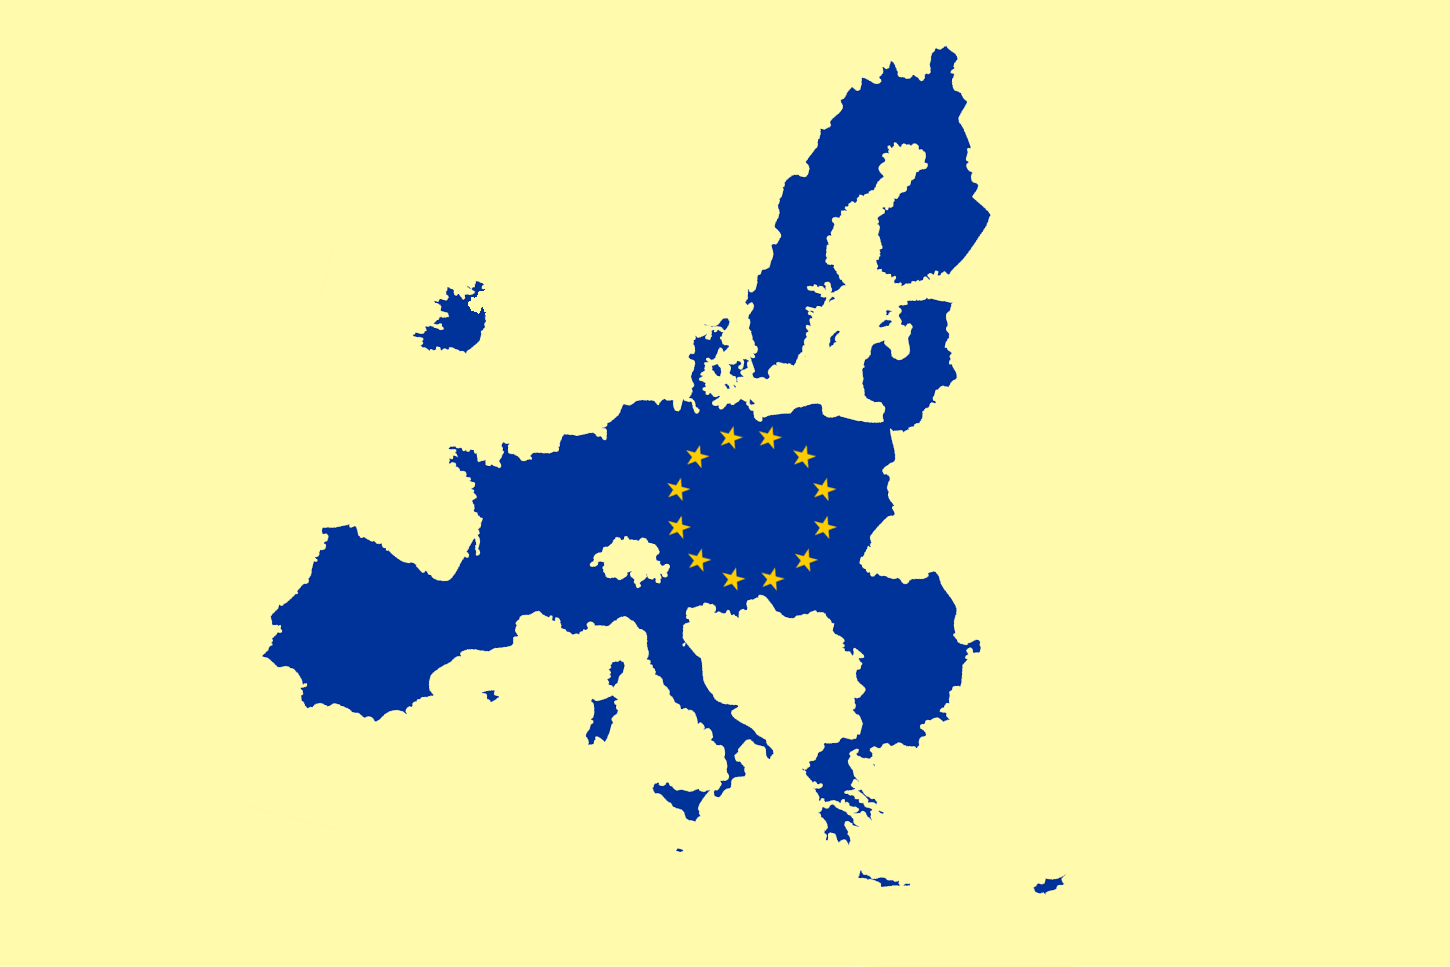 Blue and yellow map of EU